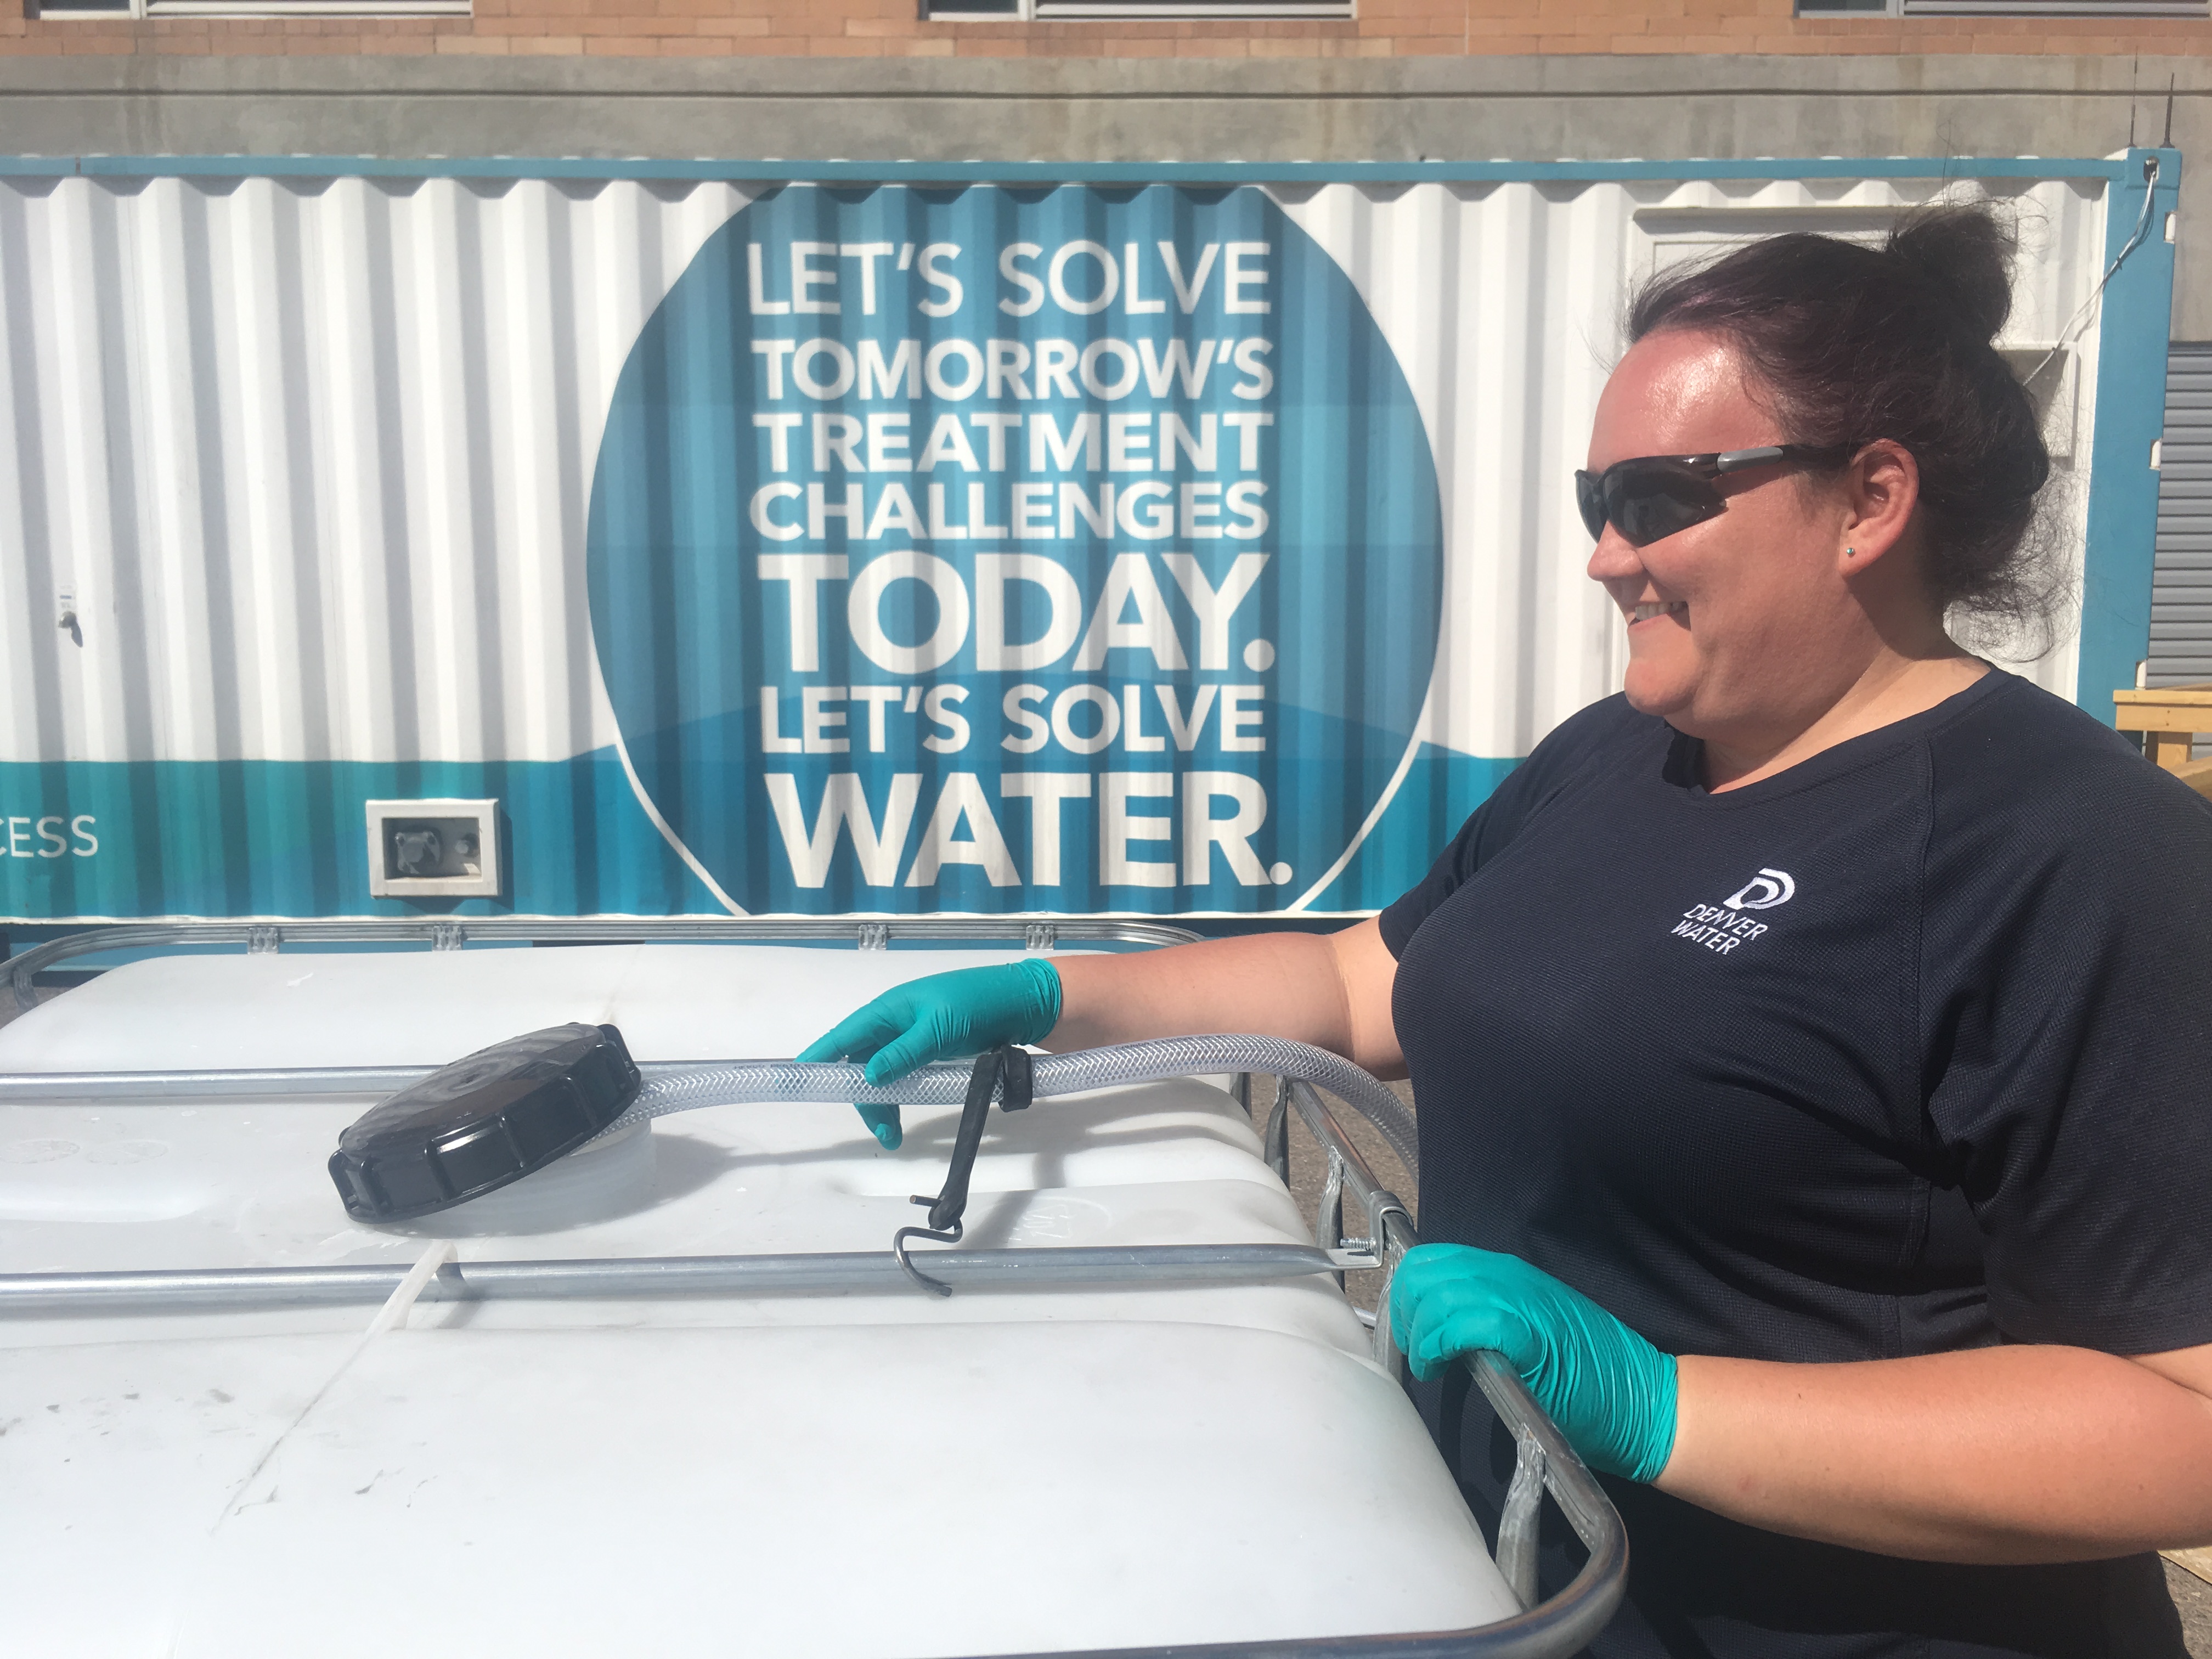 Shana Colcleasure, water treatment technician, Denver Water, fills a container with purified water that will be delivered to Declaration Brewery.